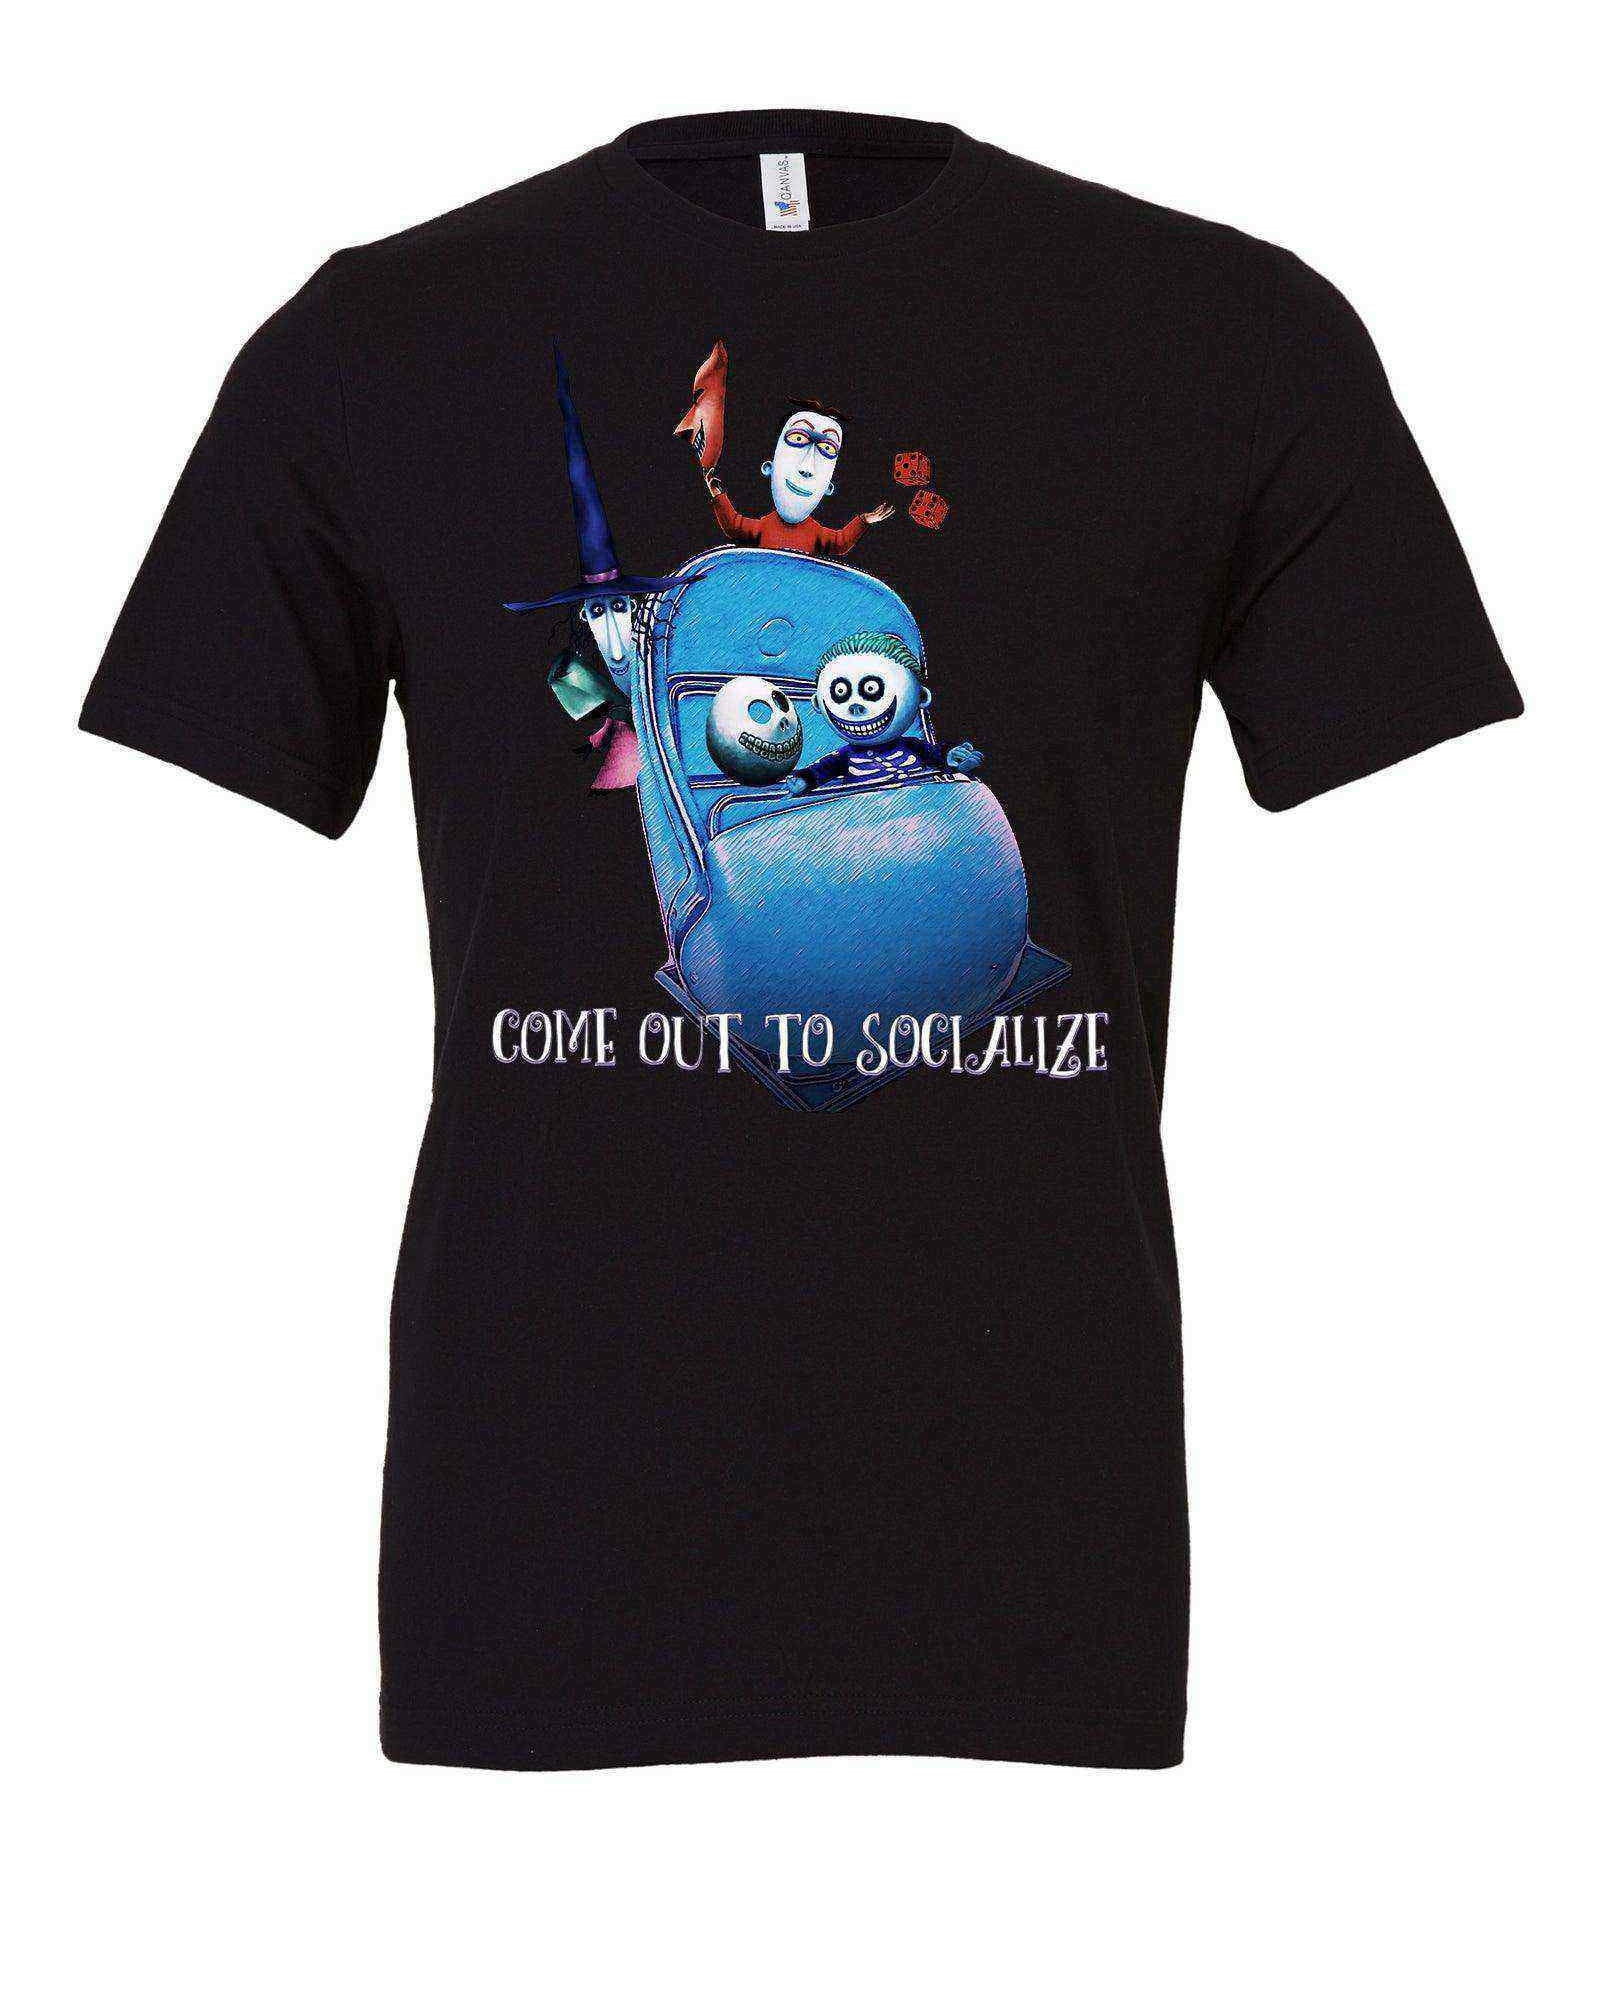 Come Out To Socialize Shirt | The Haunted Mansion | Nightmare Before Christmas - Dylan's Tees